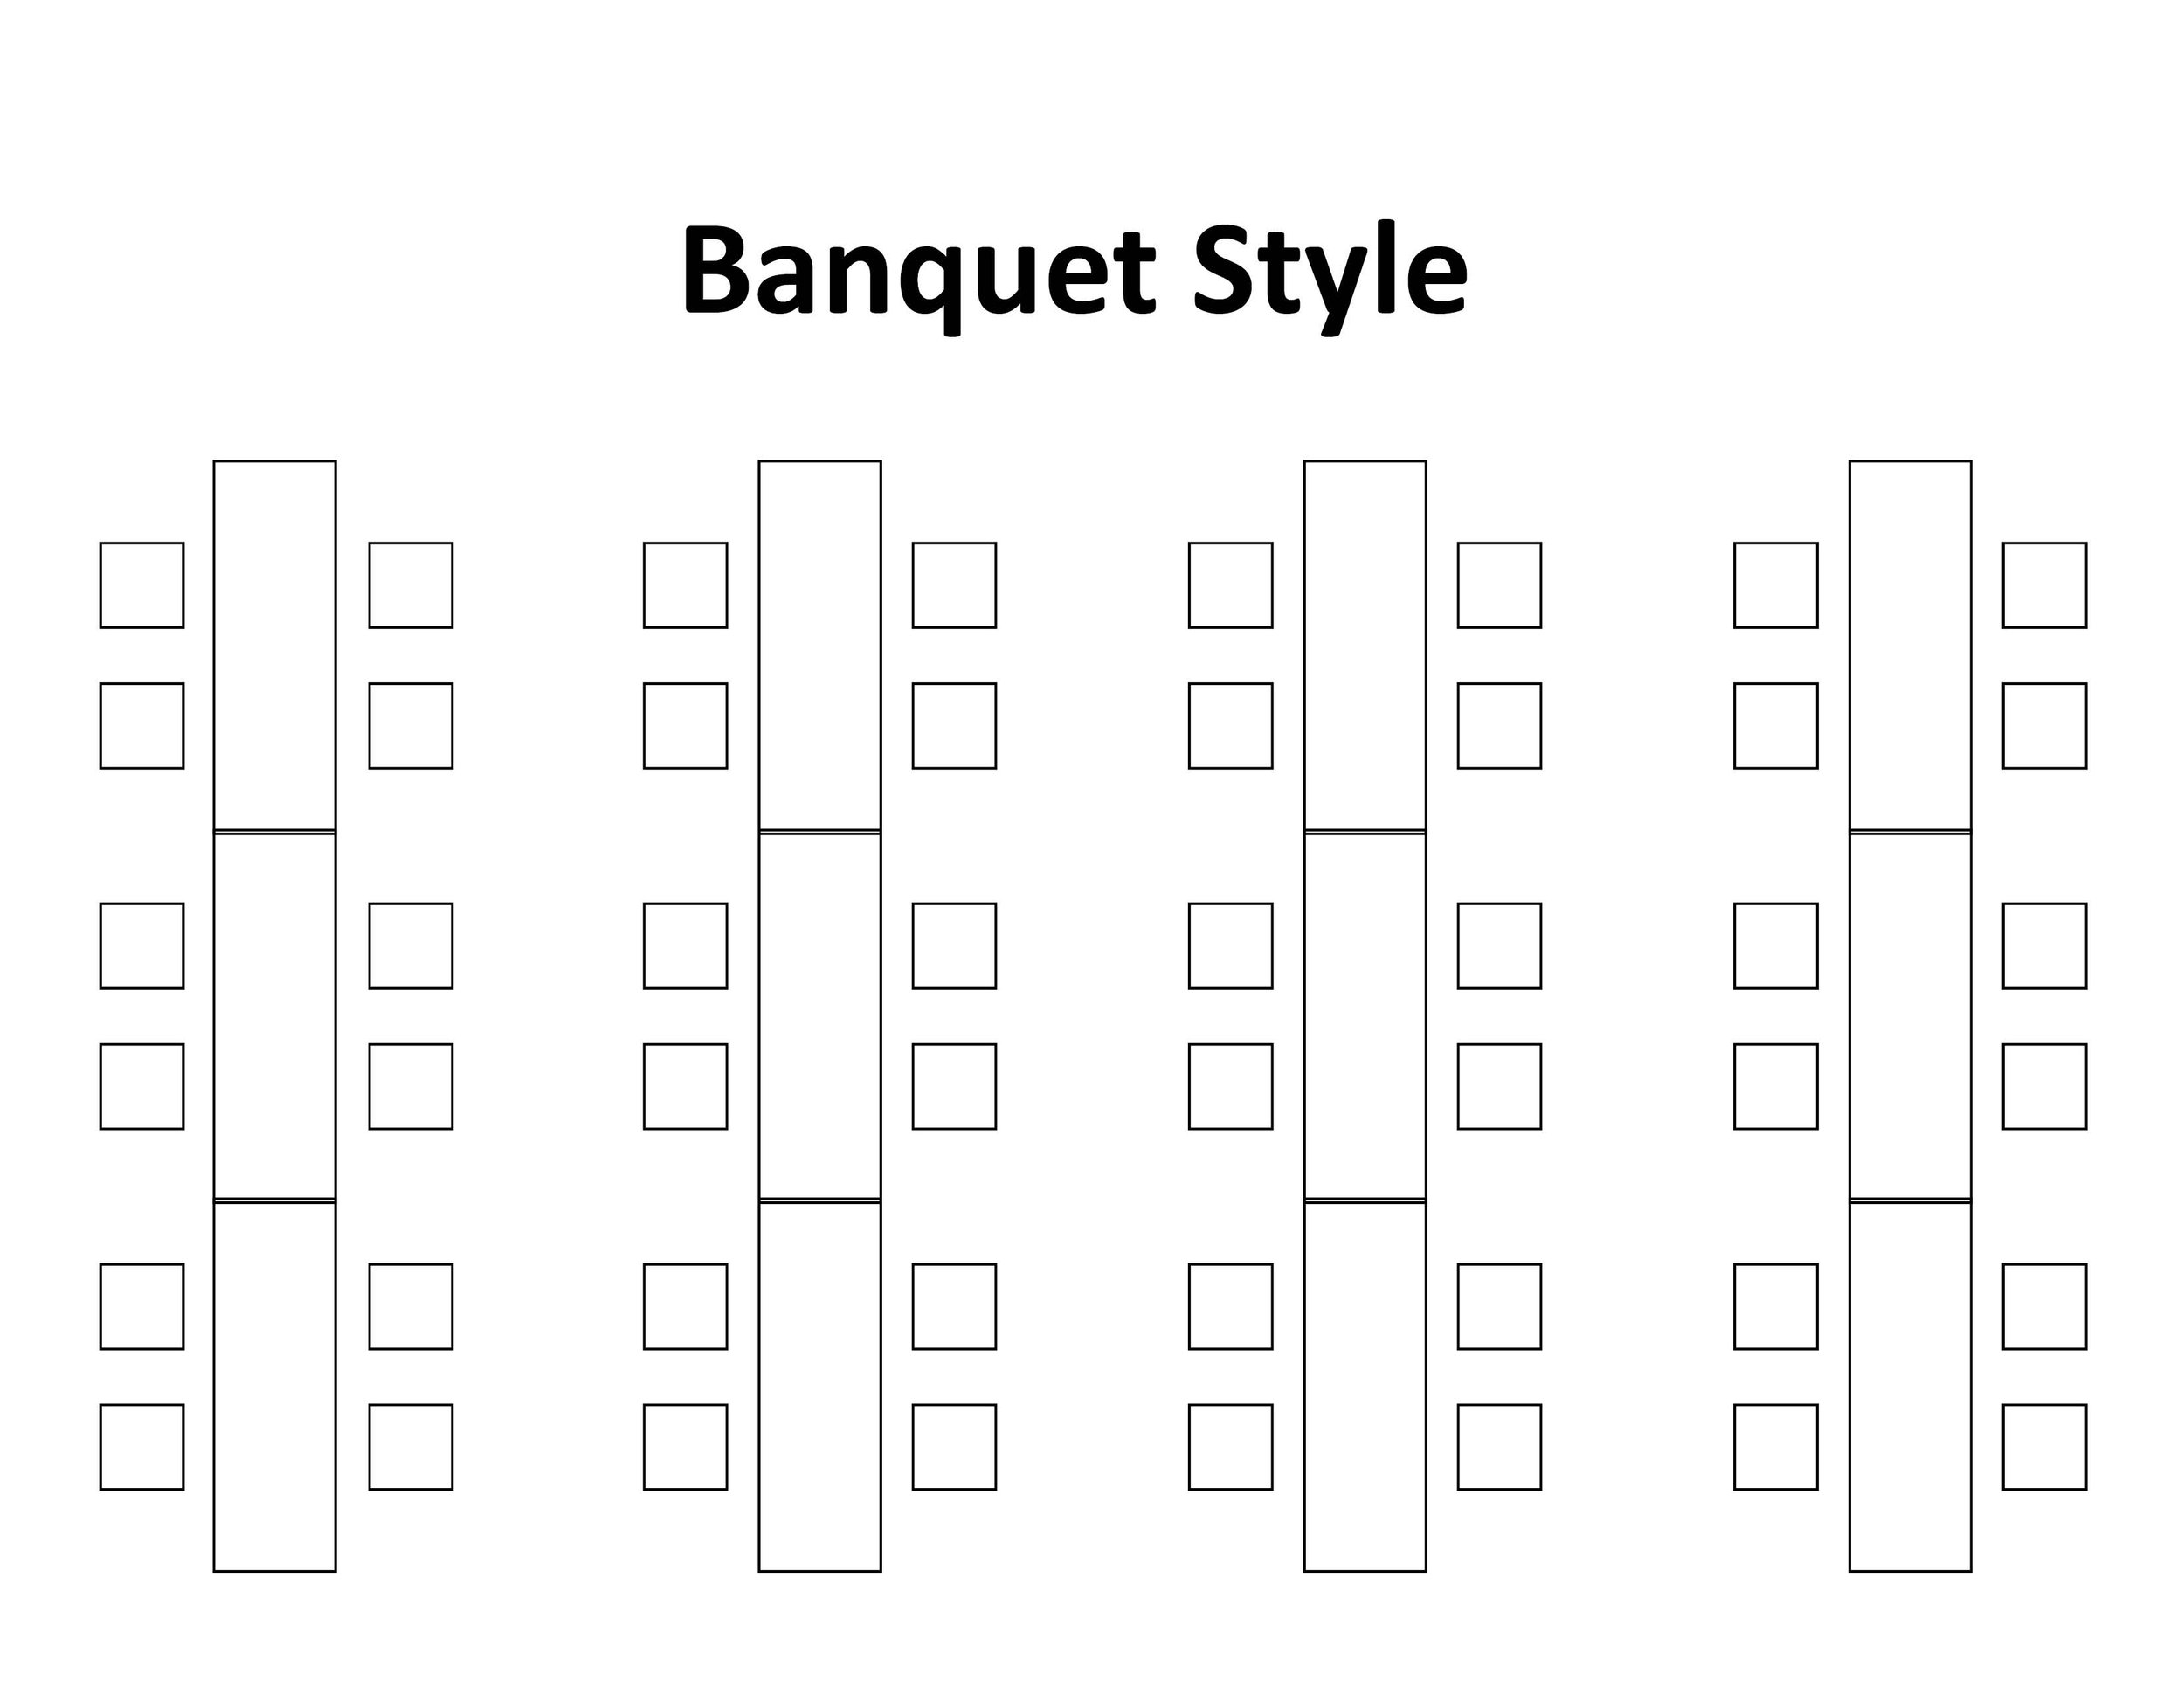 Banquet Style (Maximum seating: 48)